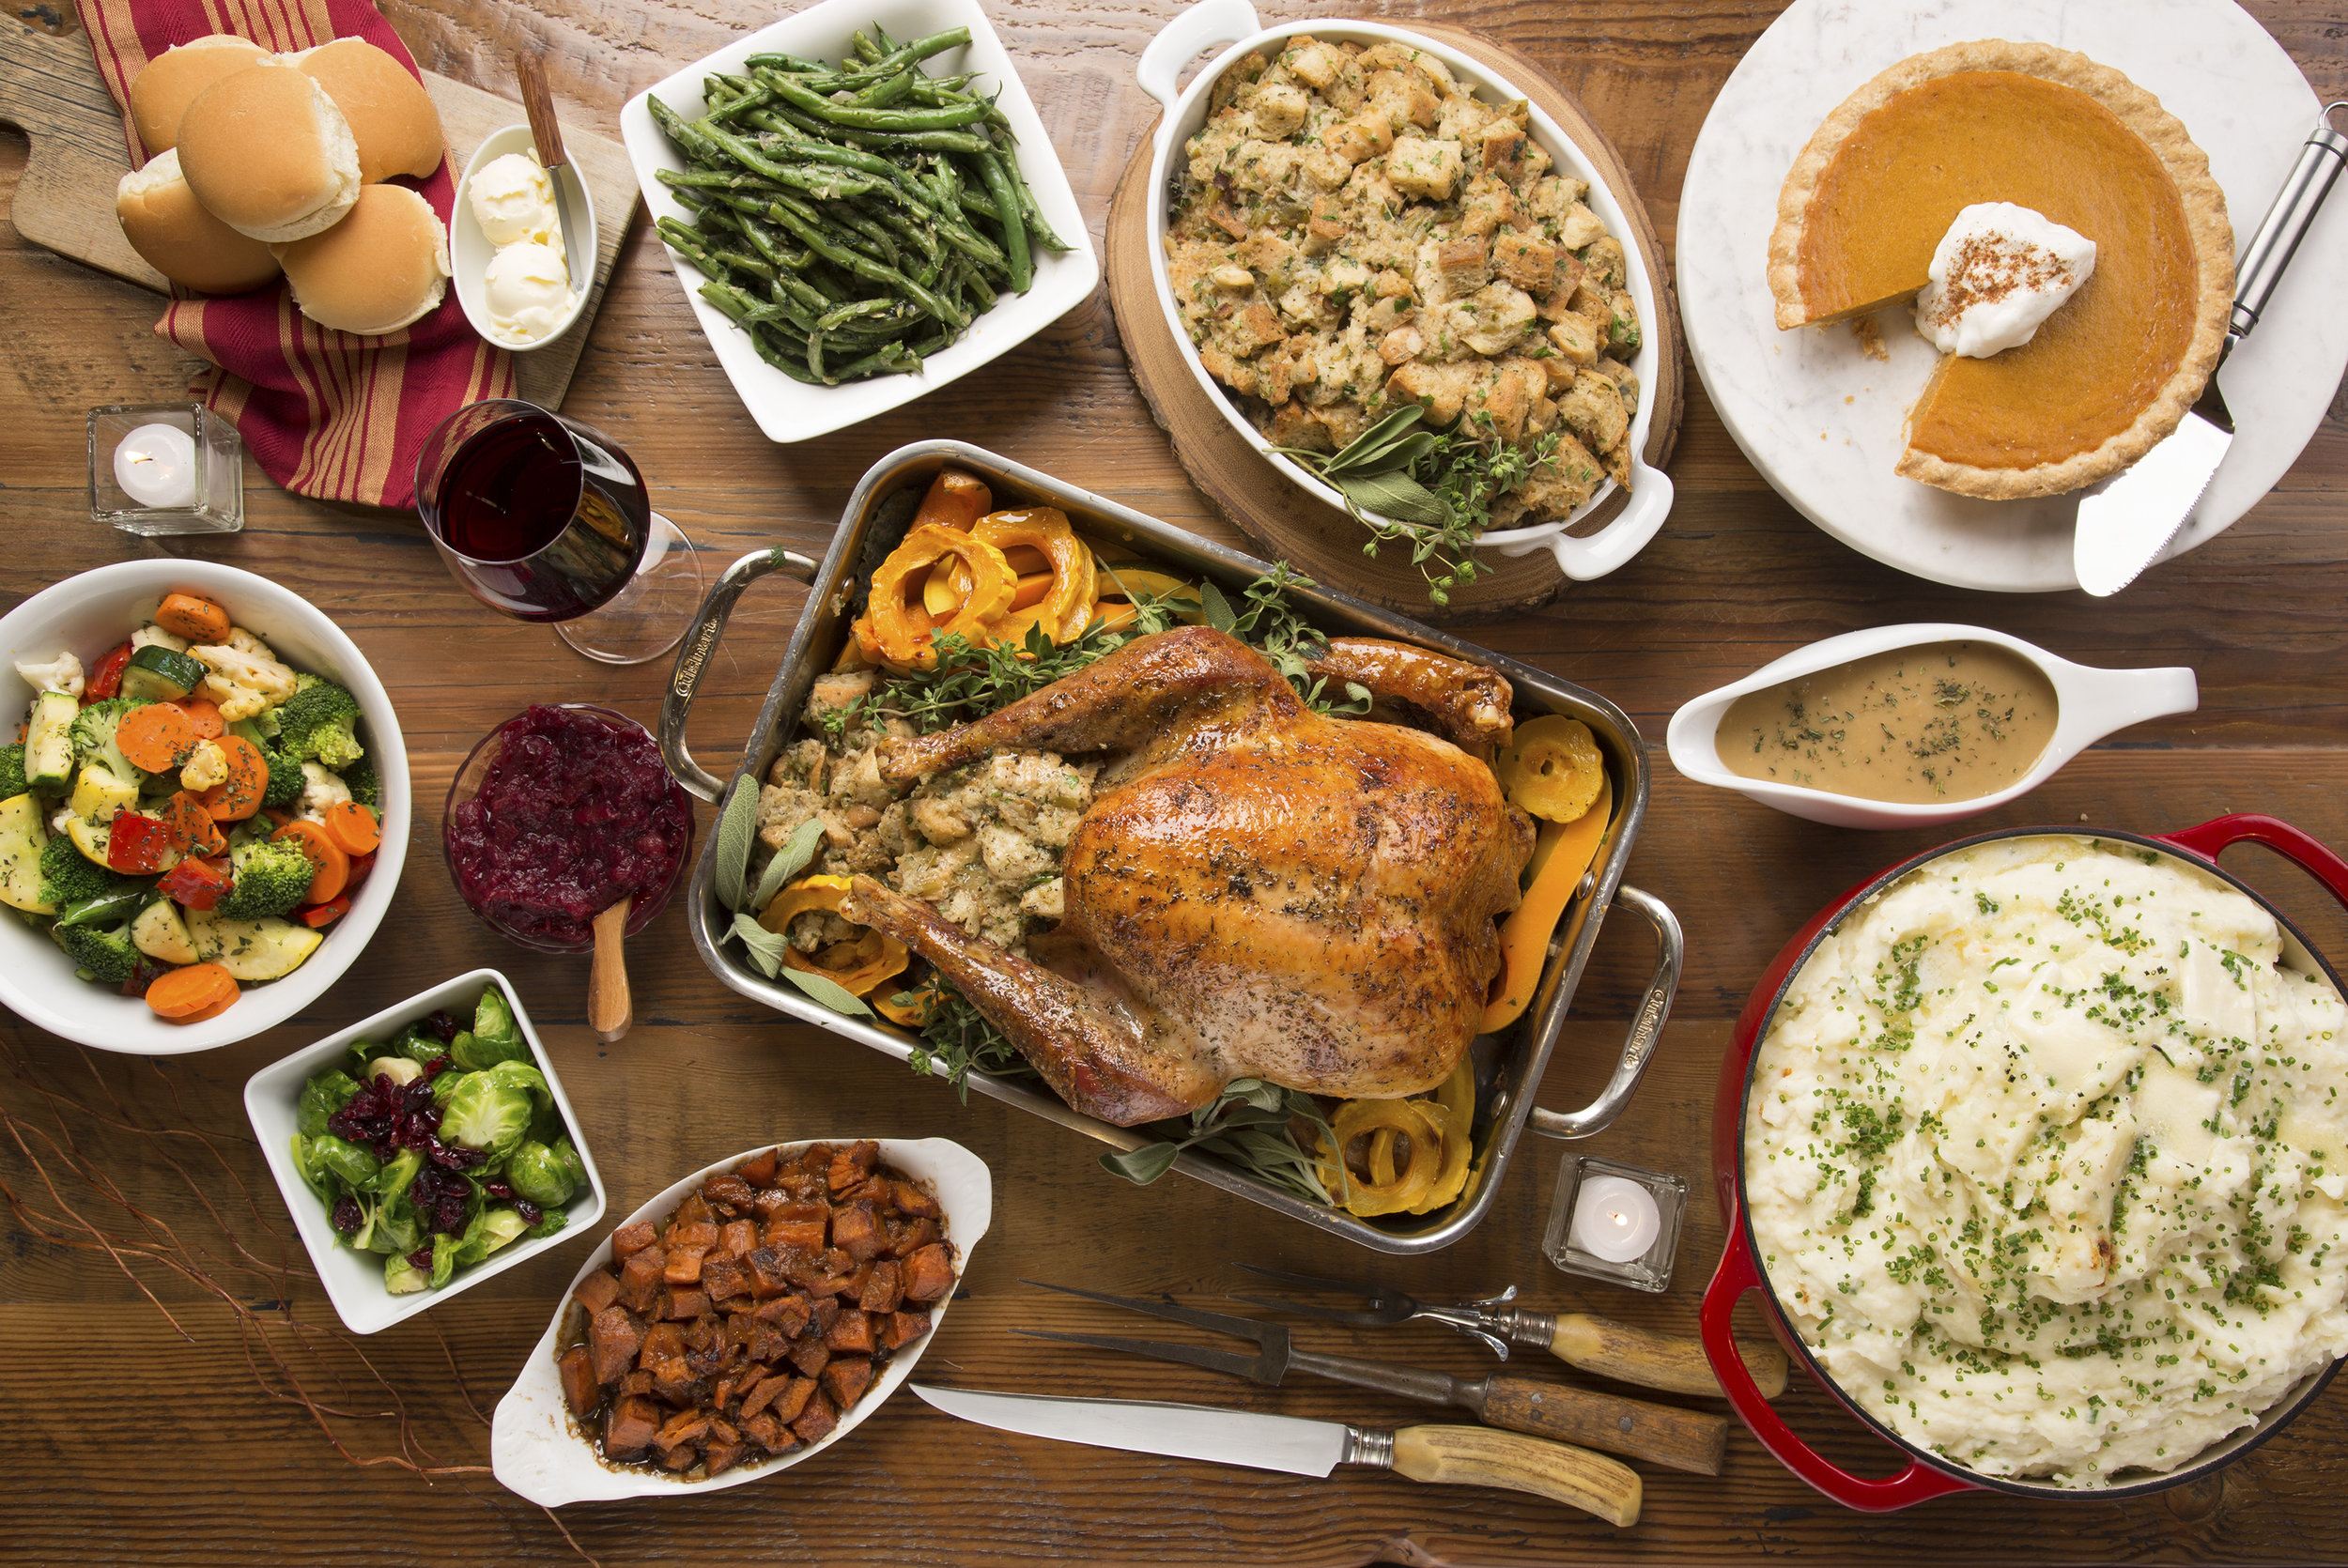 Oliver’s Market commissioned me to shoot their sumptuous turkey dinner. 